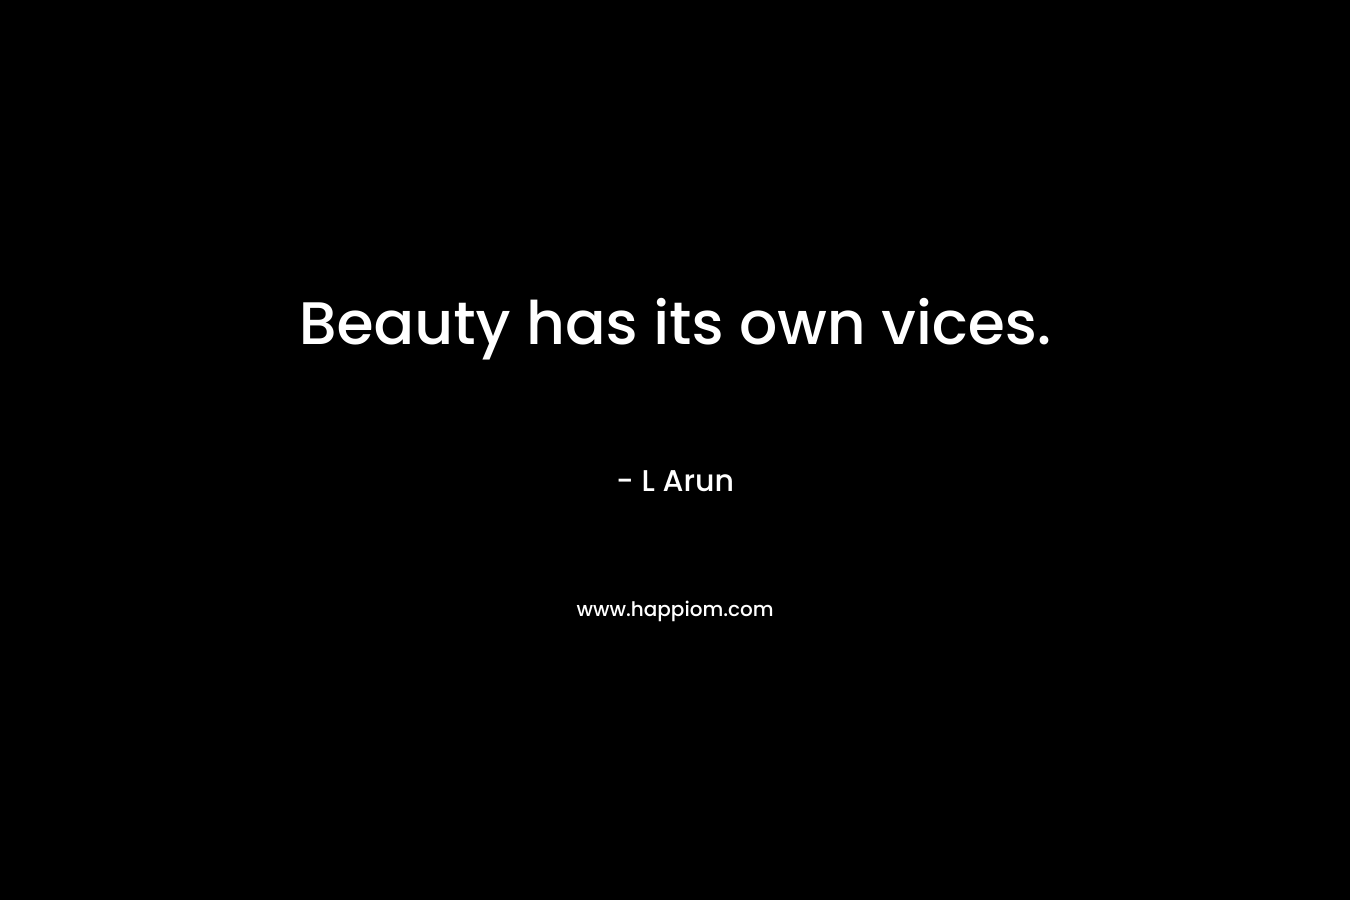 Beauty has its own vices.